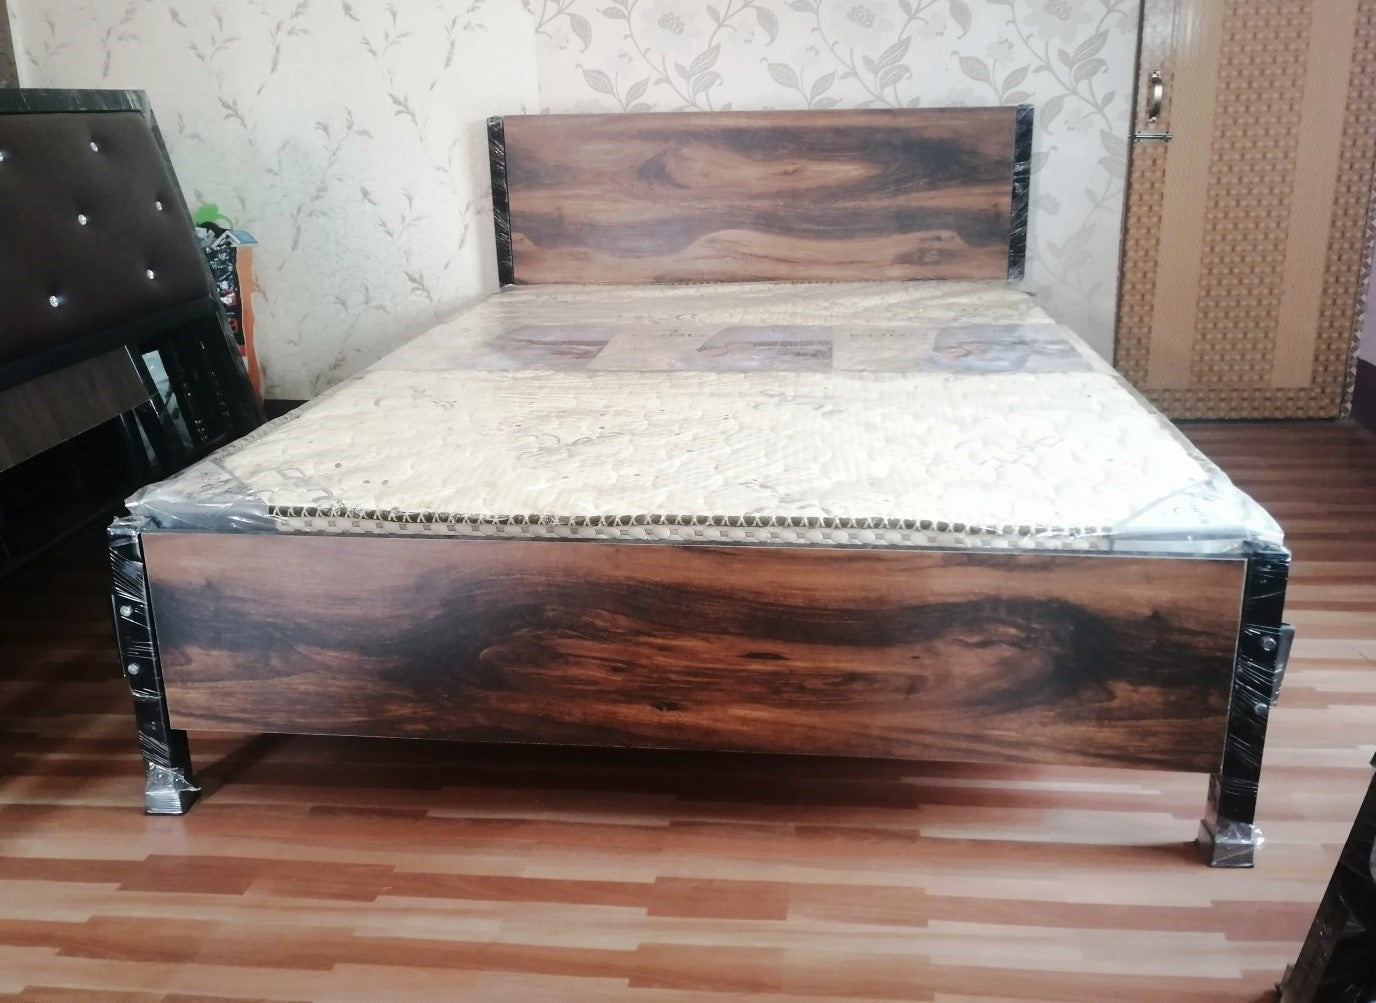 Bowzar King Bed Wooden Look Particle Board Head and Leg